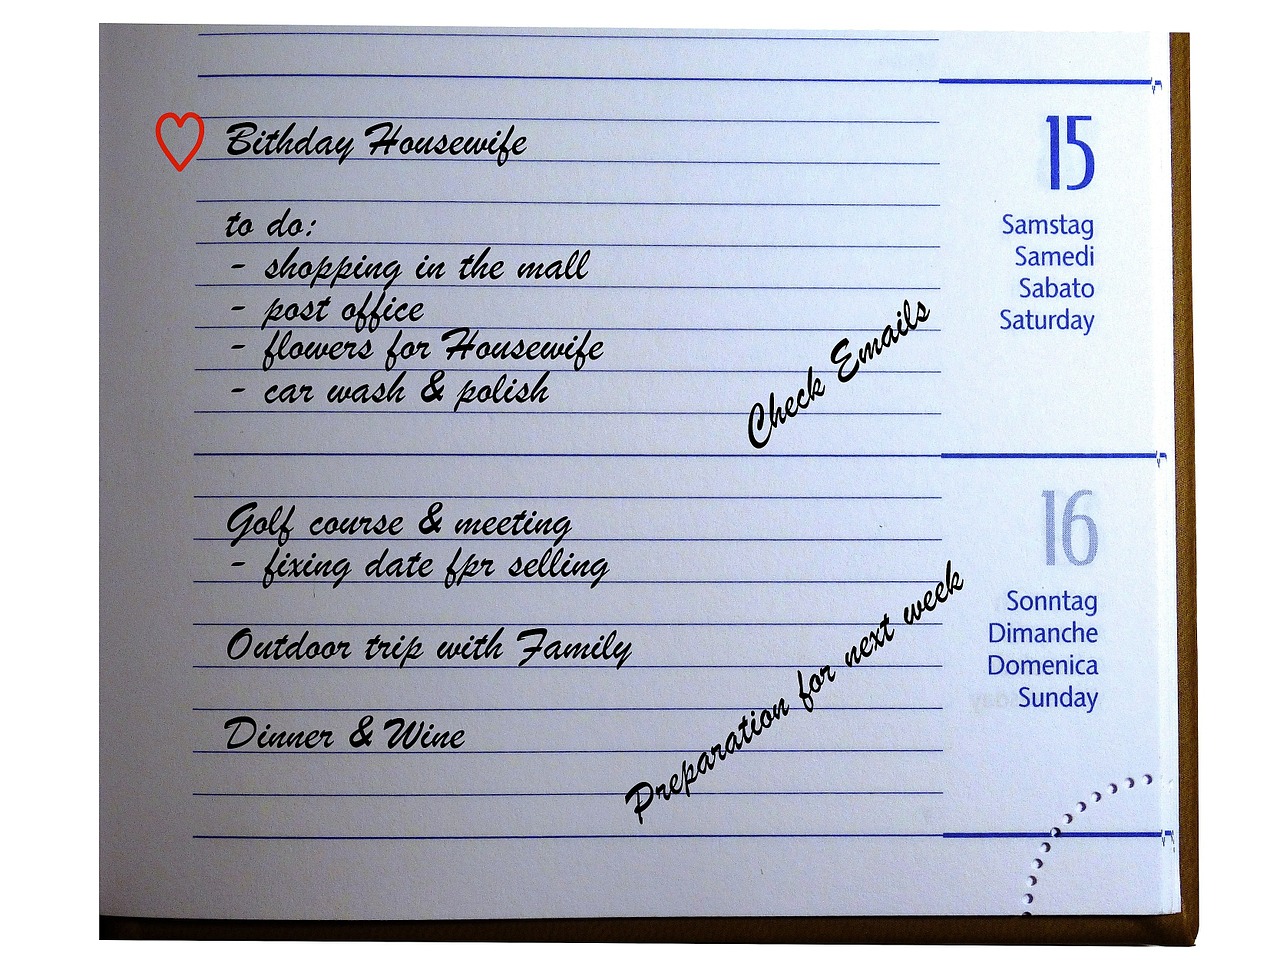 edit-free-photo-of-appointment-scheduler-calendar-planning-dates